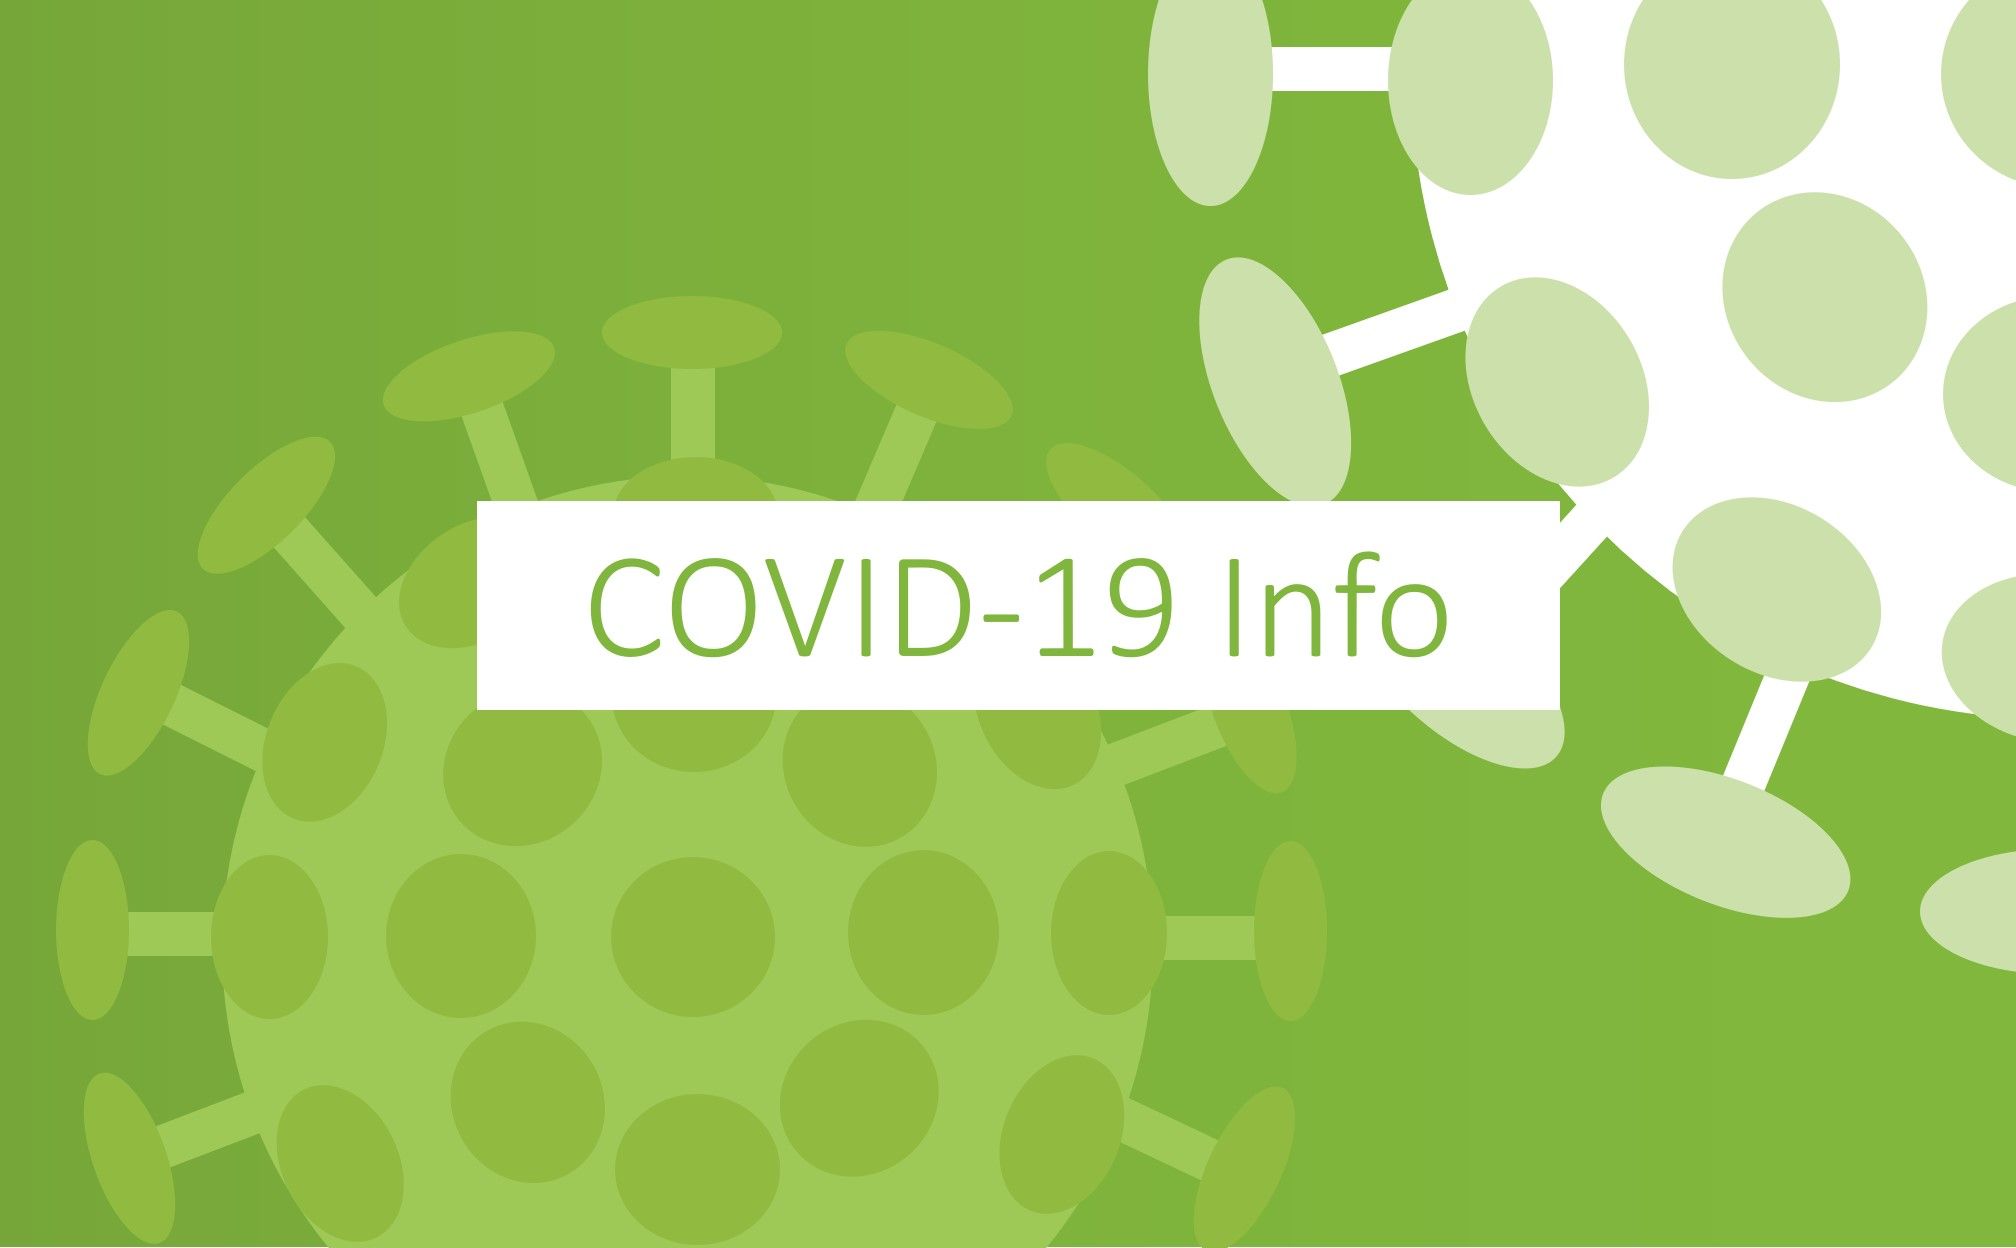 You are currently viewing COVID-19 Infopost – Auflösung der TaskForce